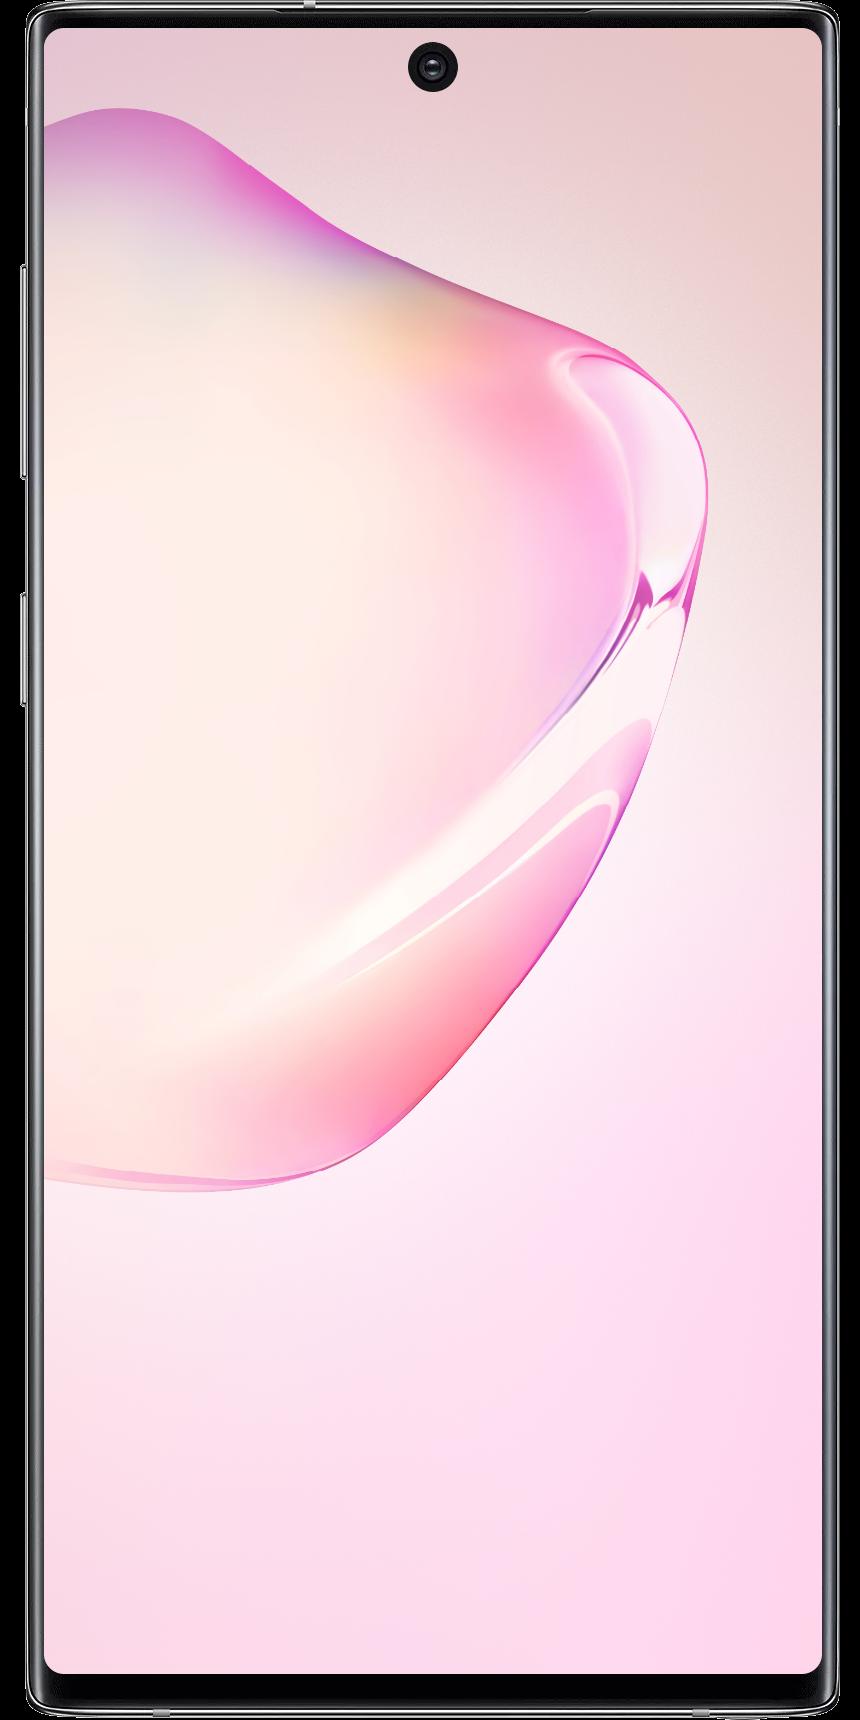 Galaxy Note 10 Live Wallpaper for Android - APK Download